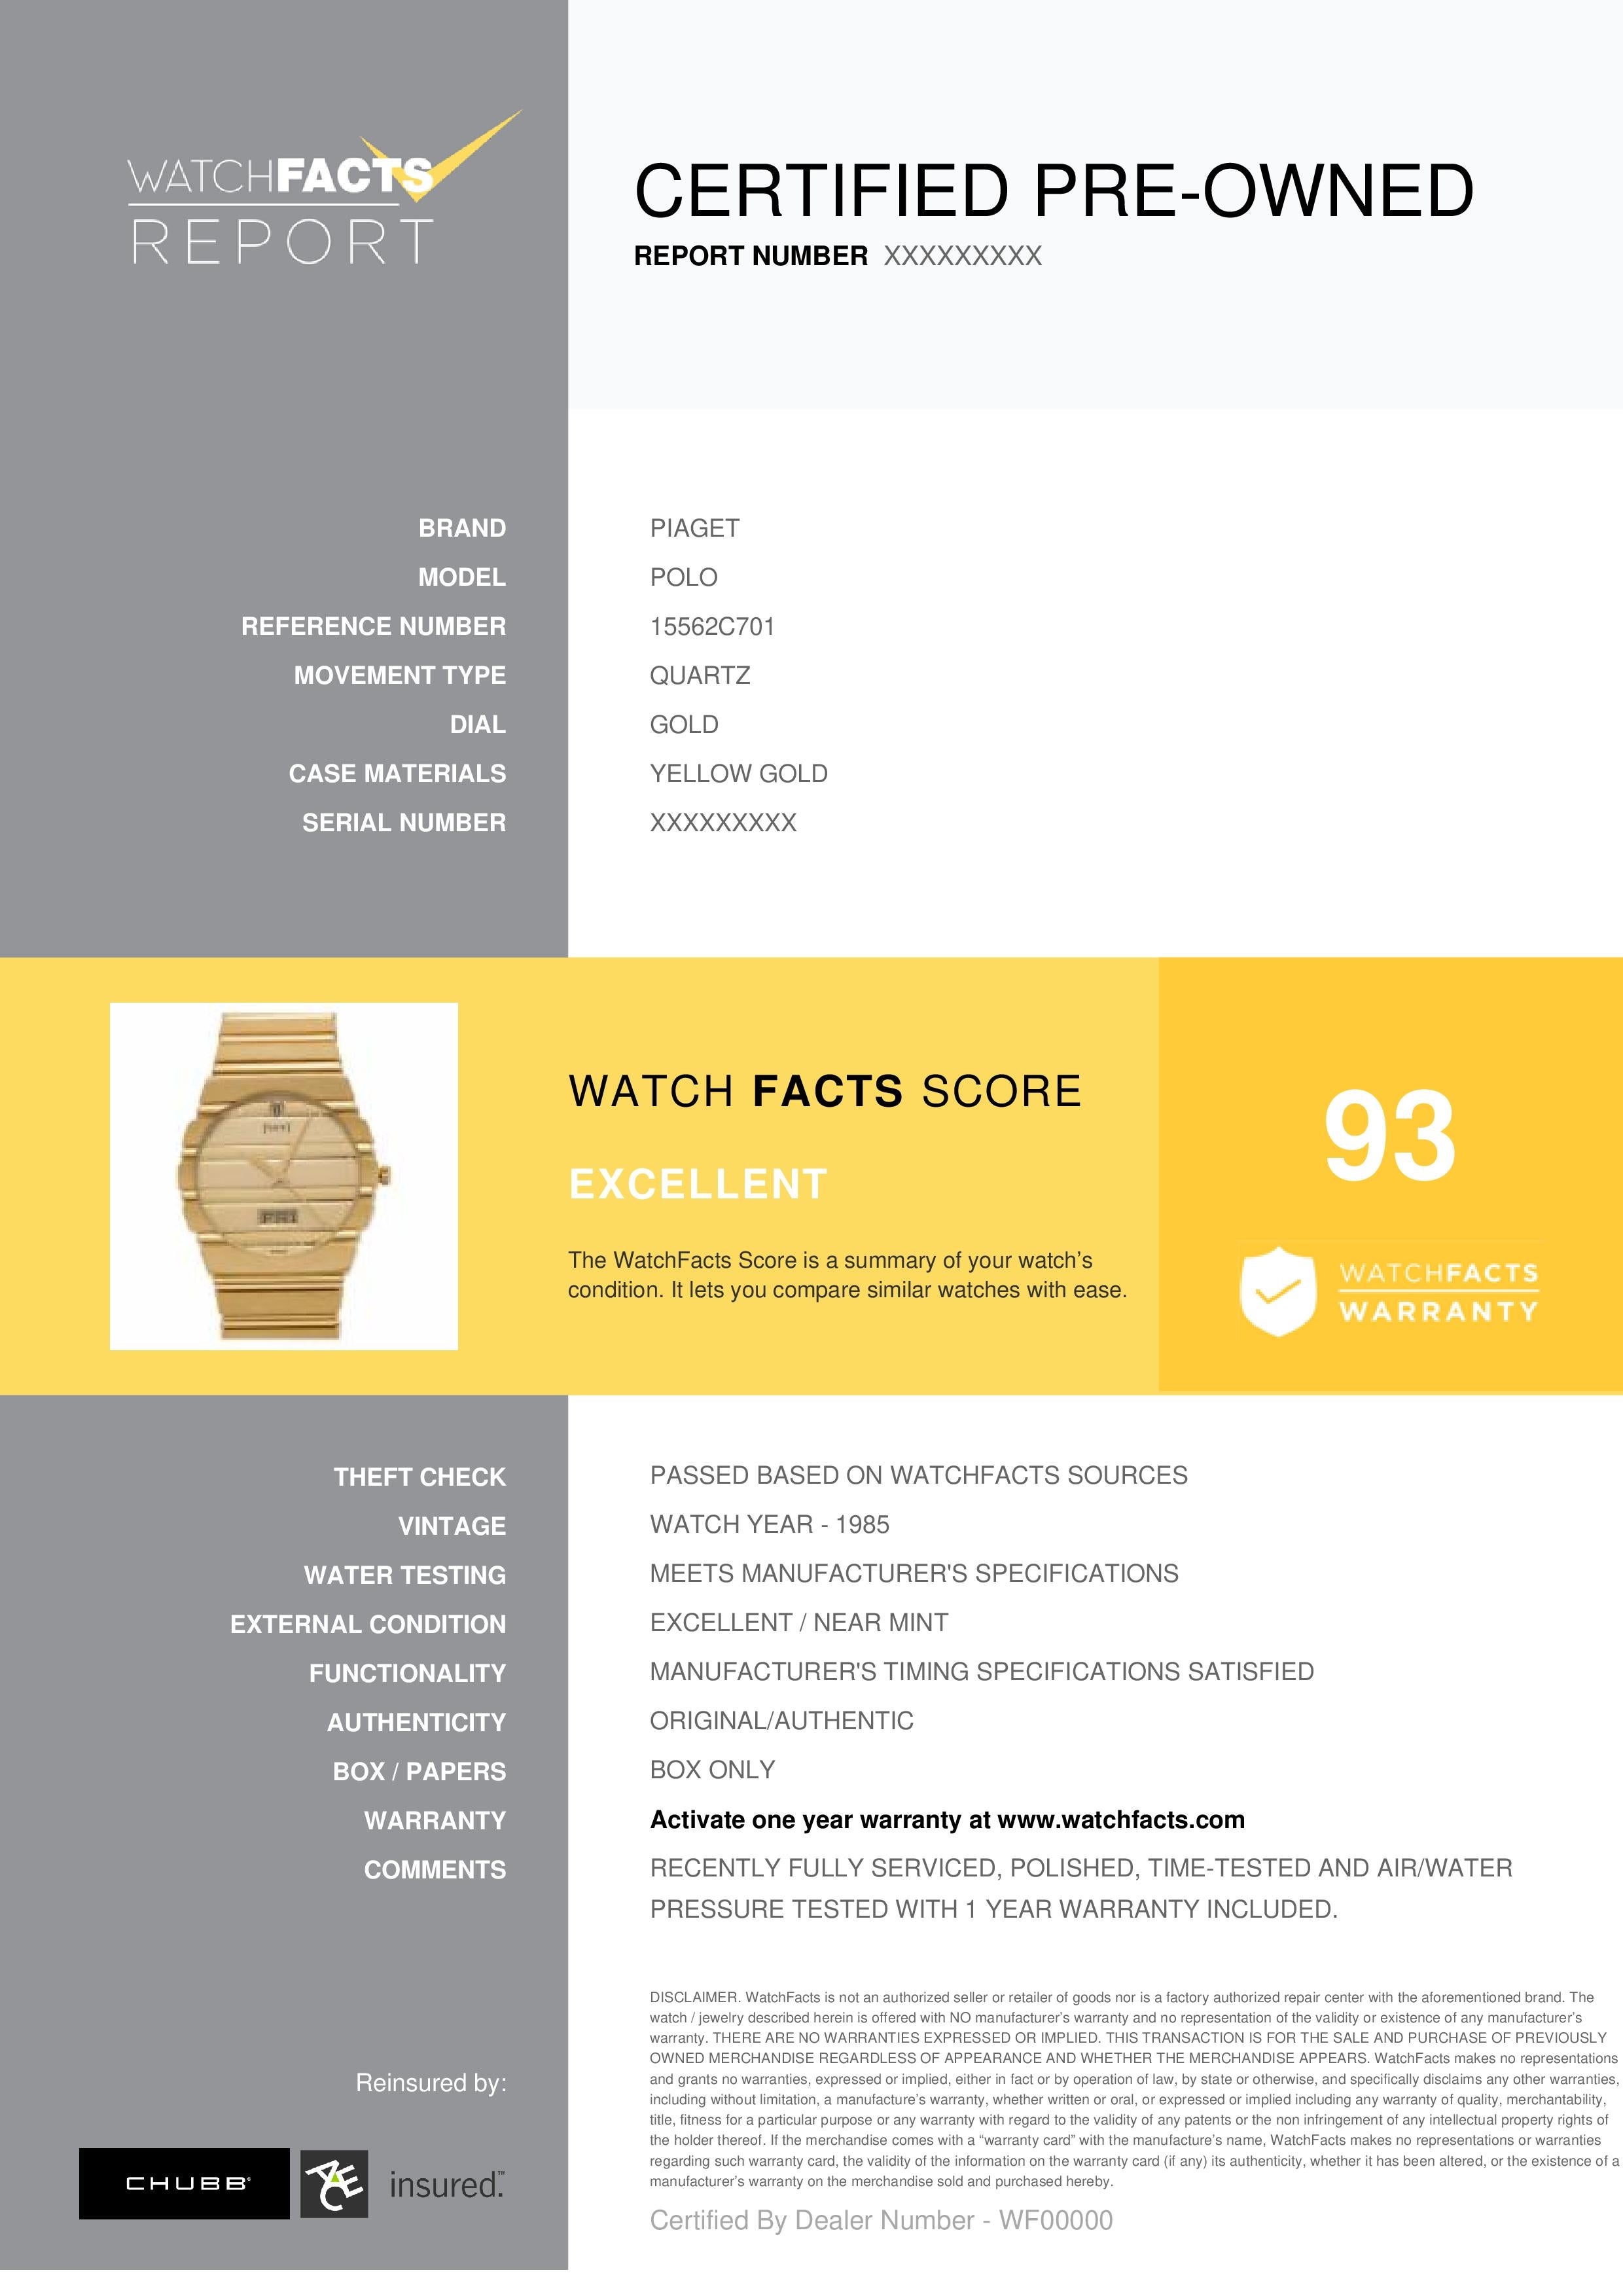 Piaget Polo Reference #: 15562c701. Mens Quartz Watch Yellow Gold Gold 0 MM. Verified and Certified by WatchFacts. 1 year warranty offered by WatchFacts.
